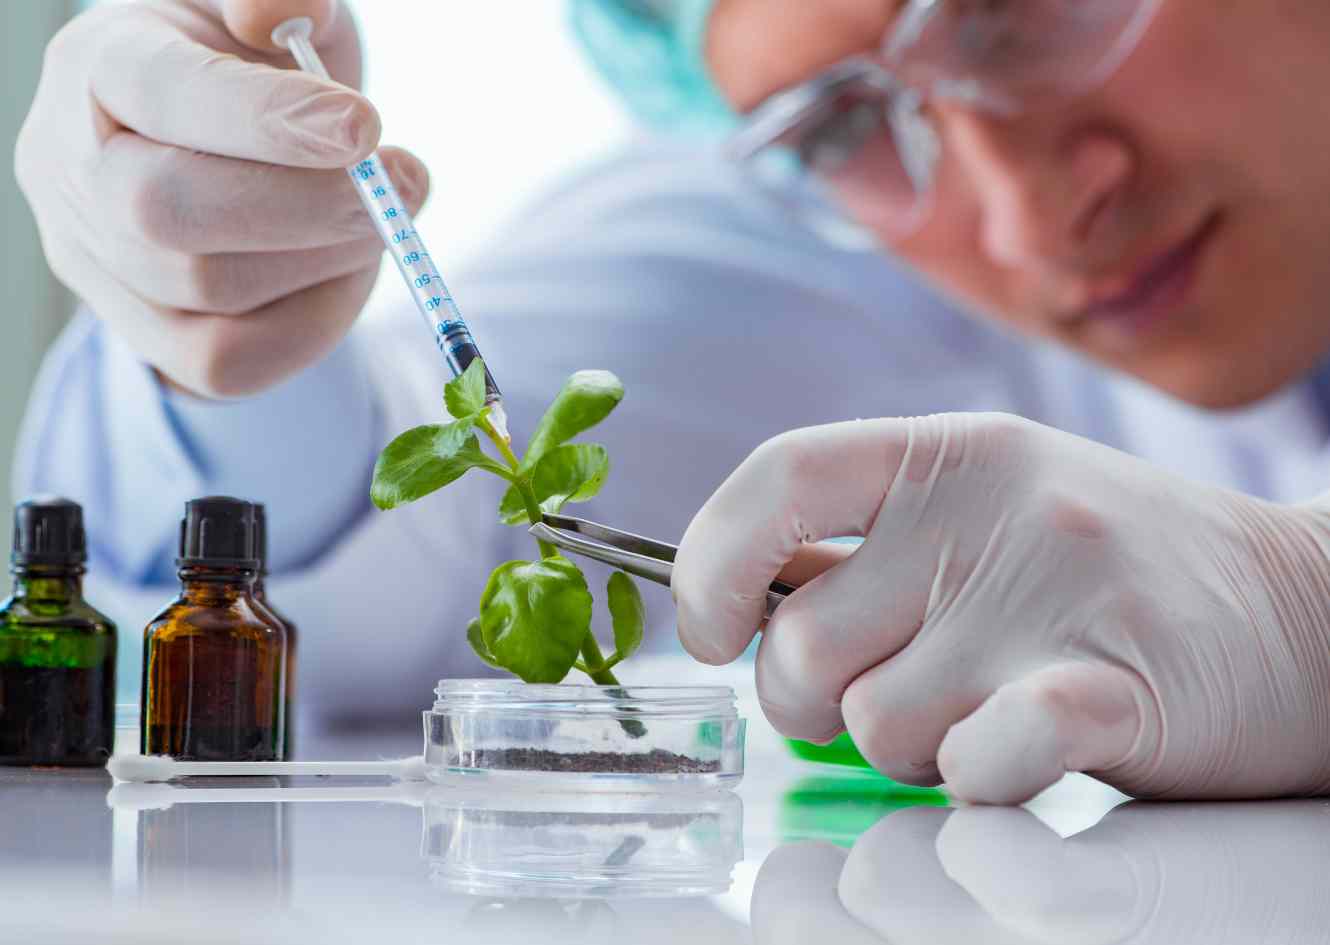 Biotechnology in India